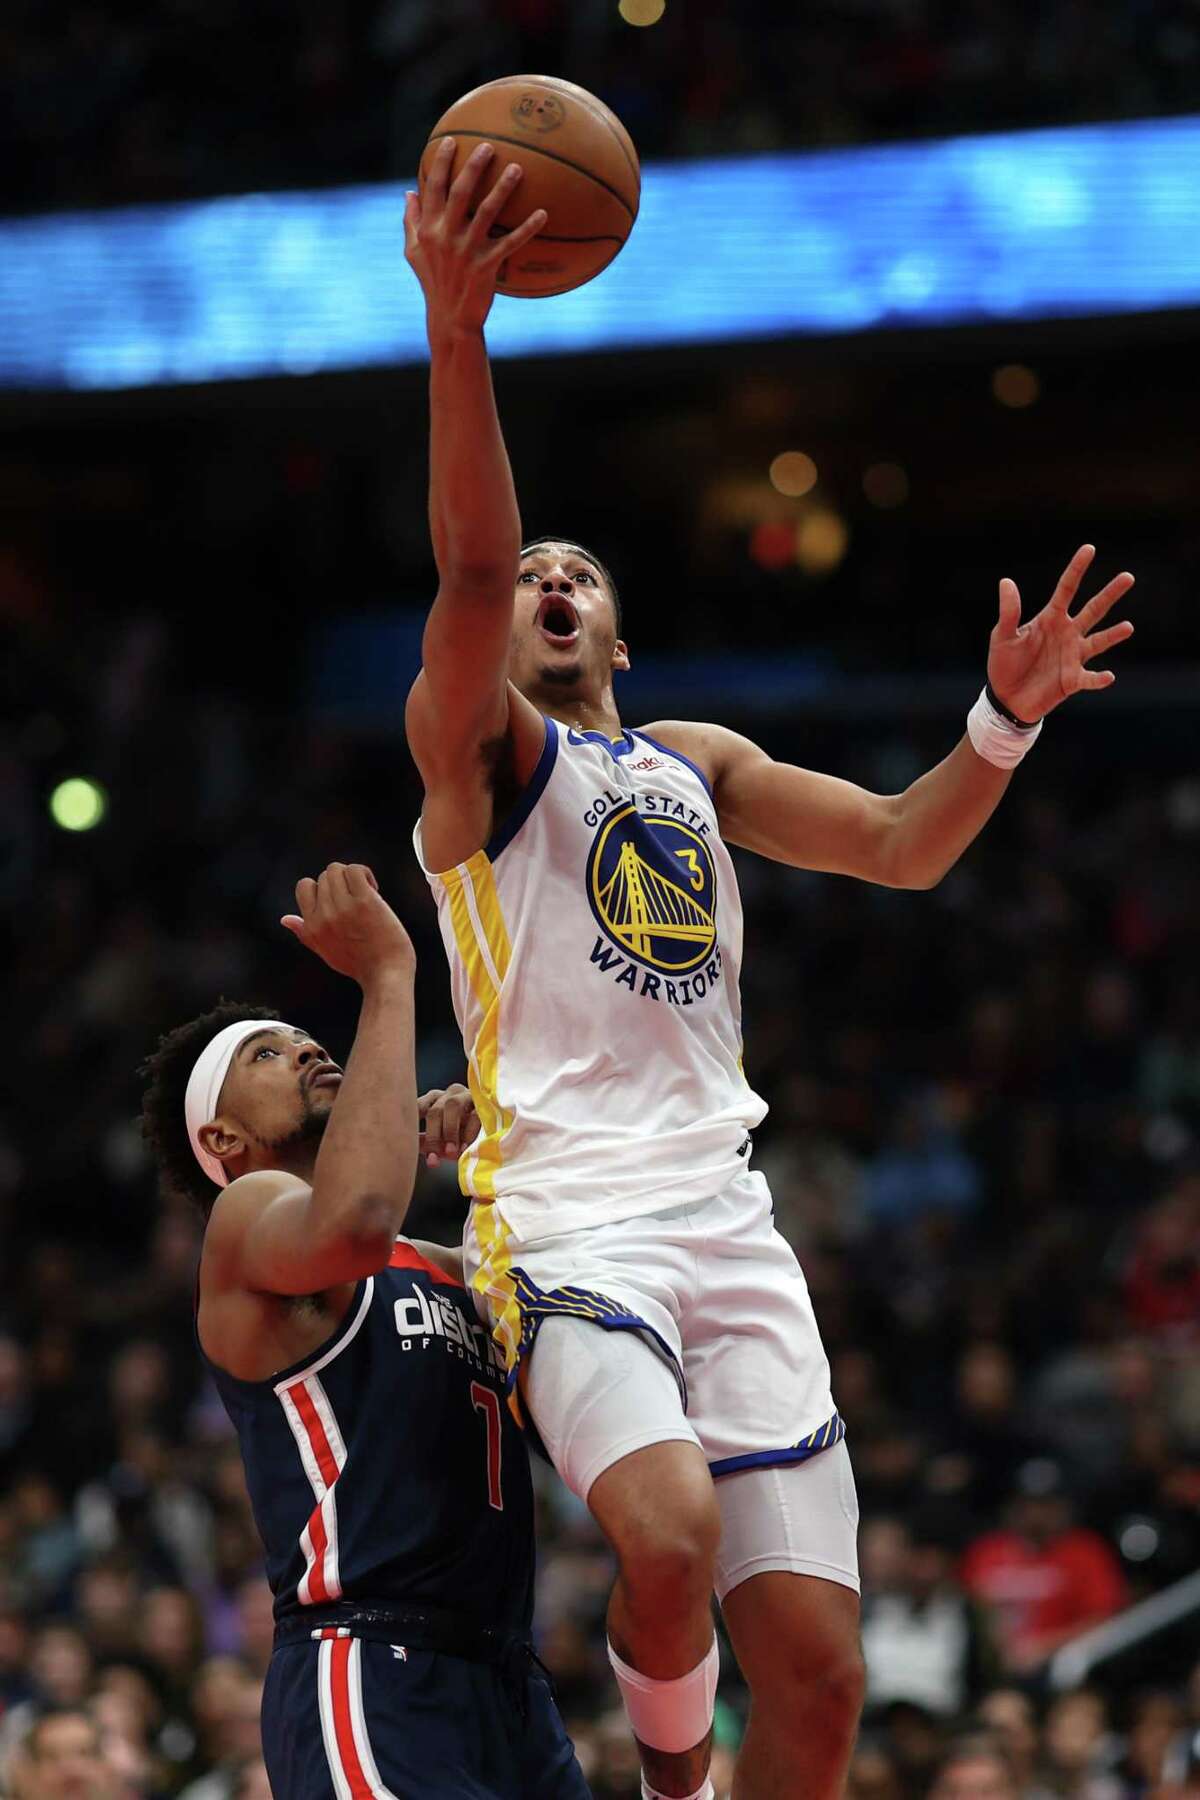 WASHINGTON, DC - JANUARY 16: Jordan Poole #3 of the Golden State Warriors shoots against the Washington Wizards during the first half at Capital One Arena on January 16, 2023 in Washington, DC. NOTE TO USER: User expressly acknowledges and agrees that, by downloading and or using this photograph, User is consenting to the terms and conditions of the Getty Images License Agreement. (Photo by Patrick Smith/Getty Images)